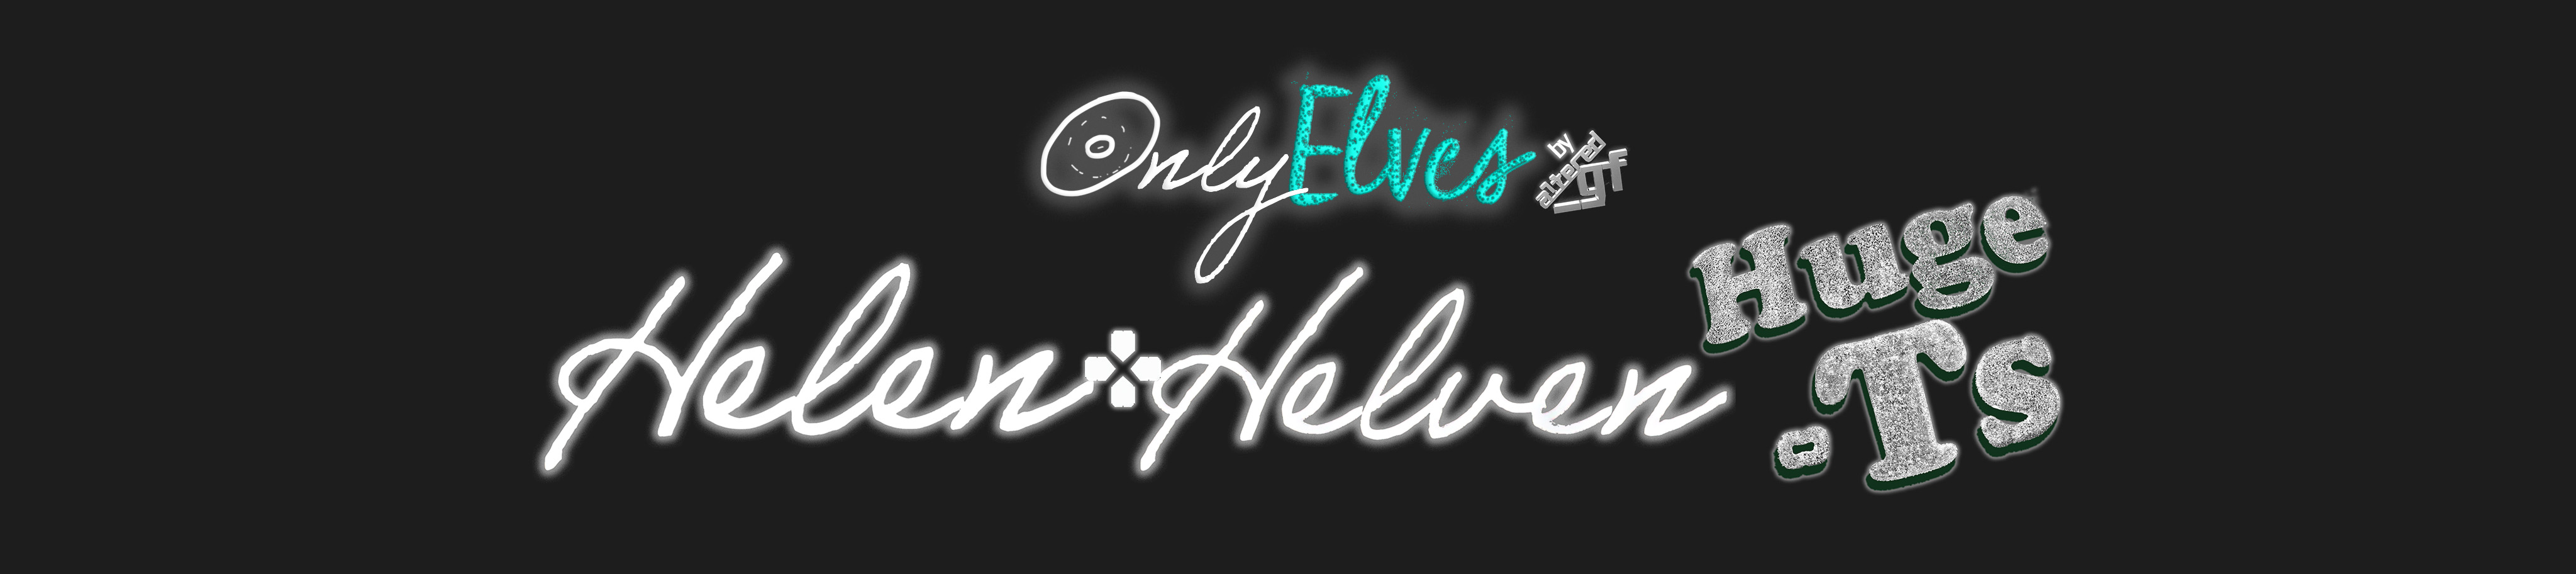 a_gf presents Helen and Helven Huge Ts in OnlyElves.jpg